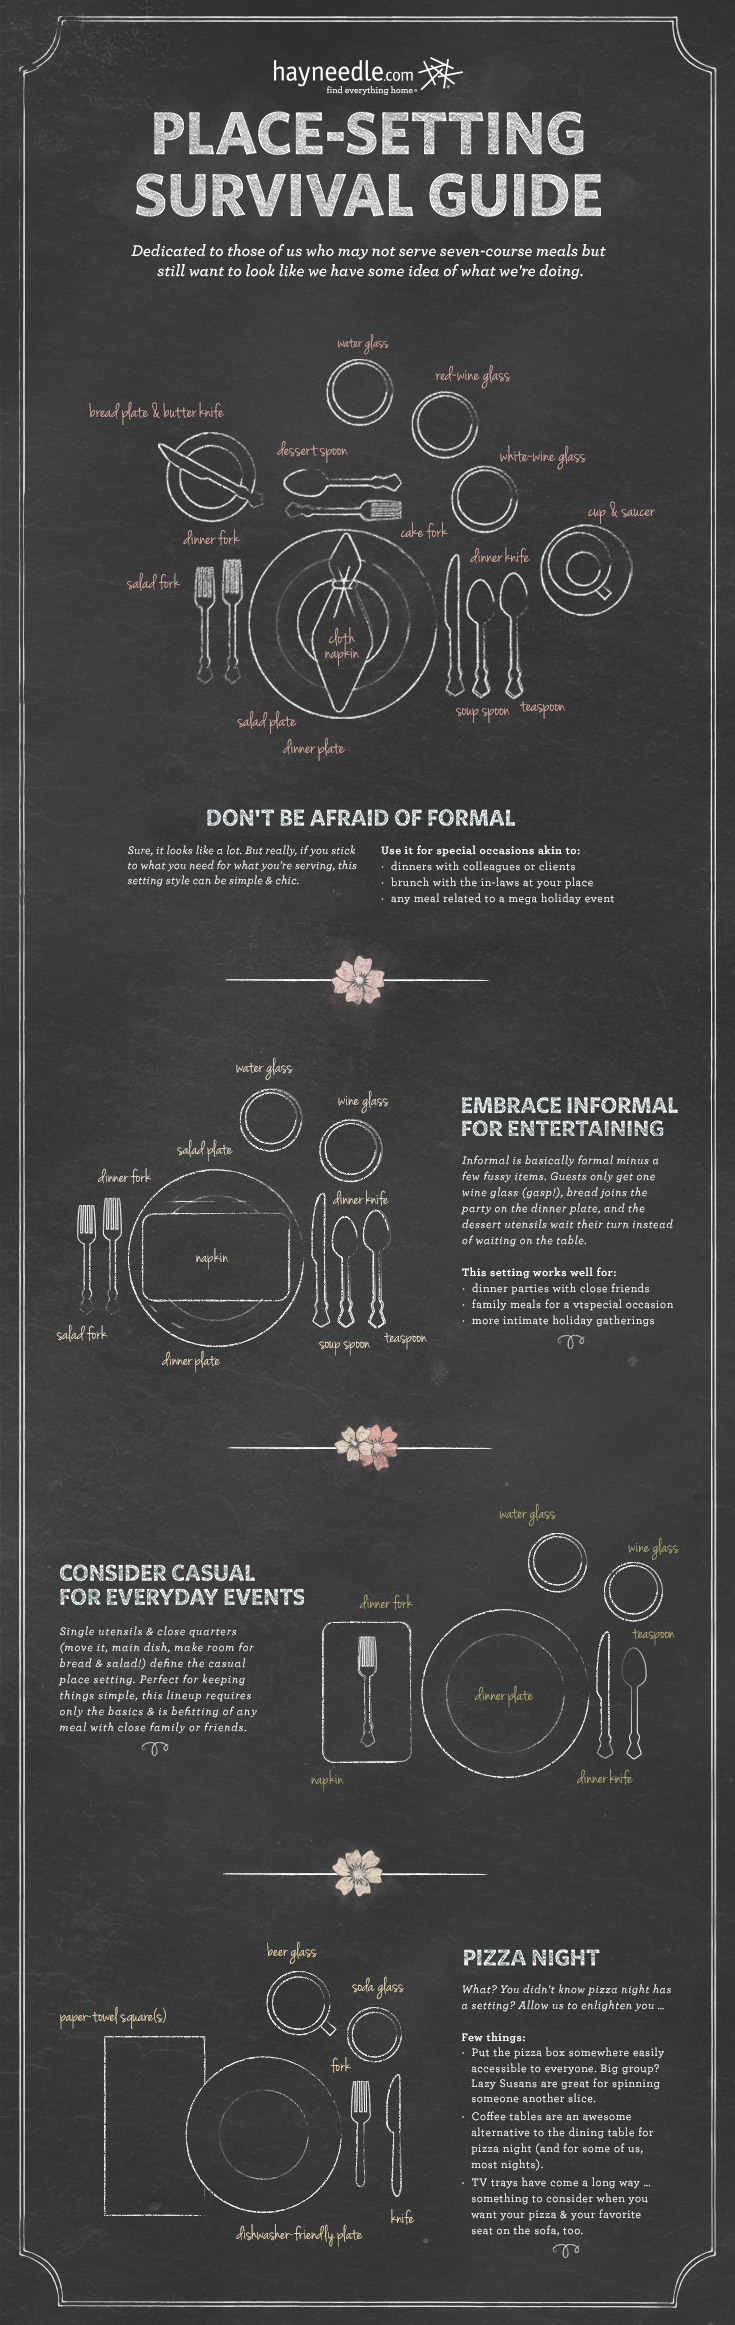 Formal and Informal Place Settings for the Holidays